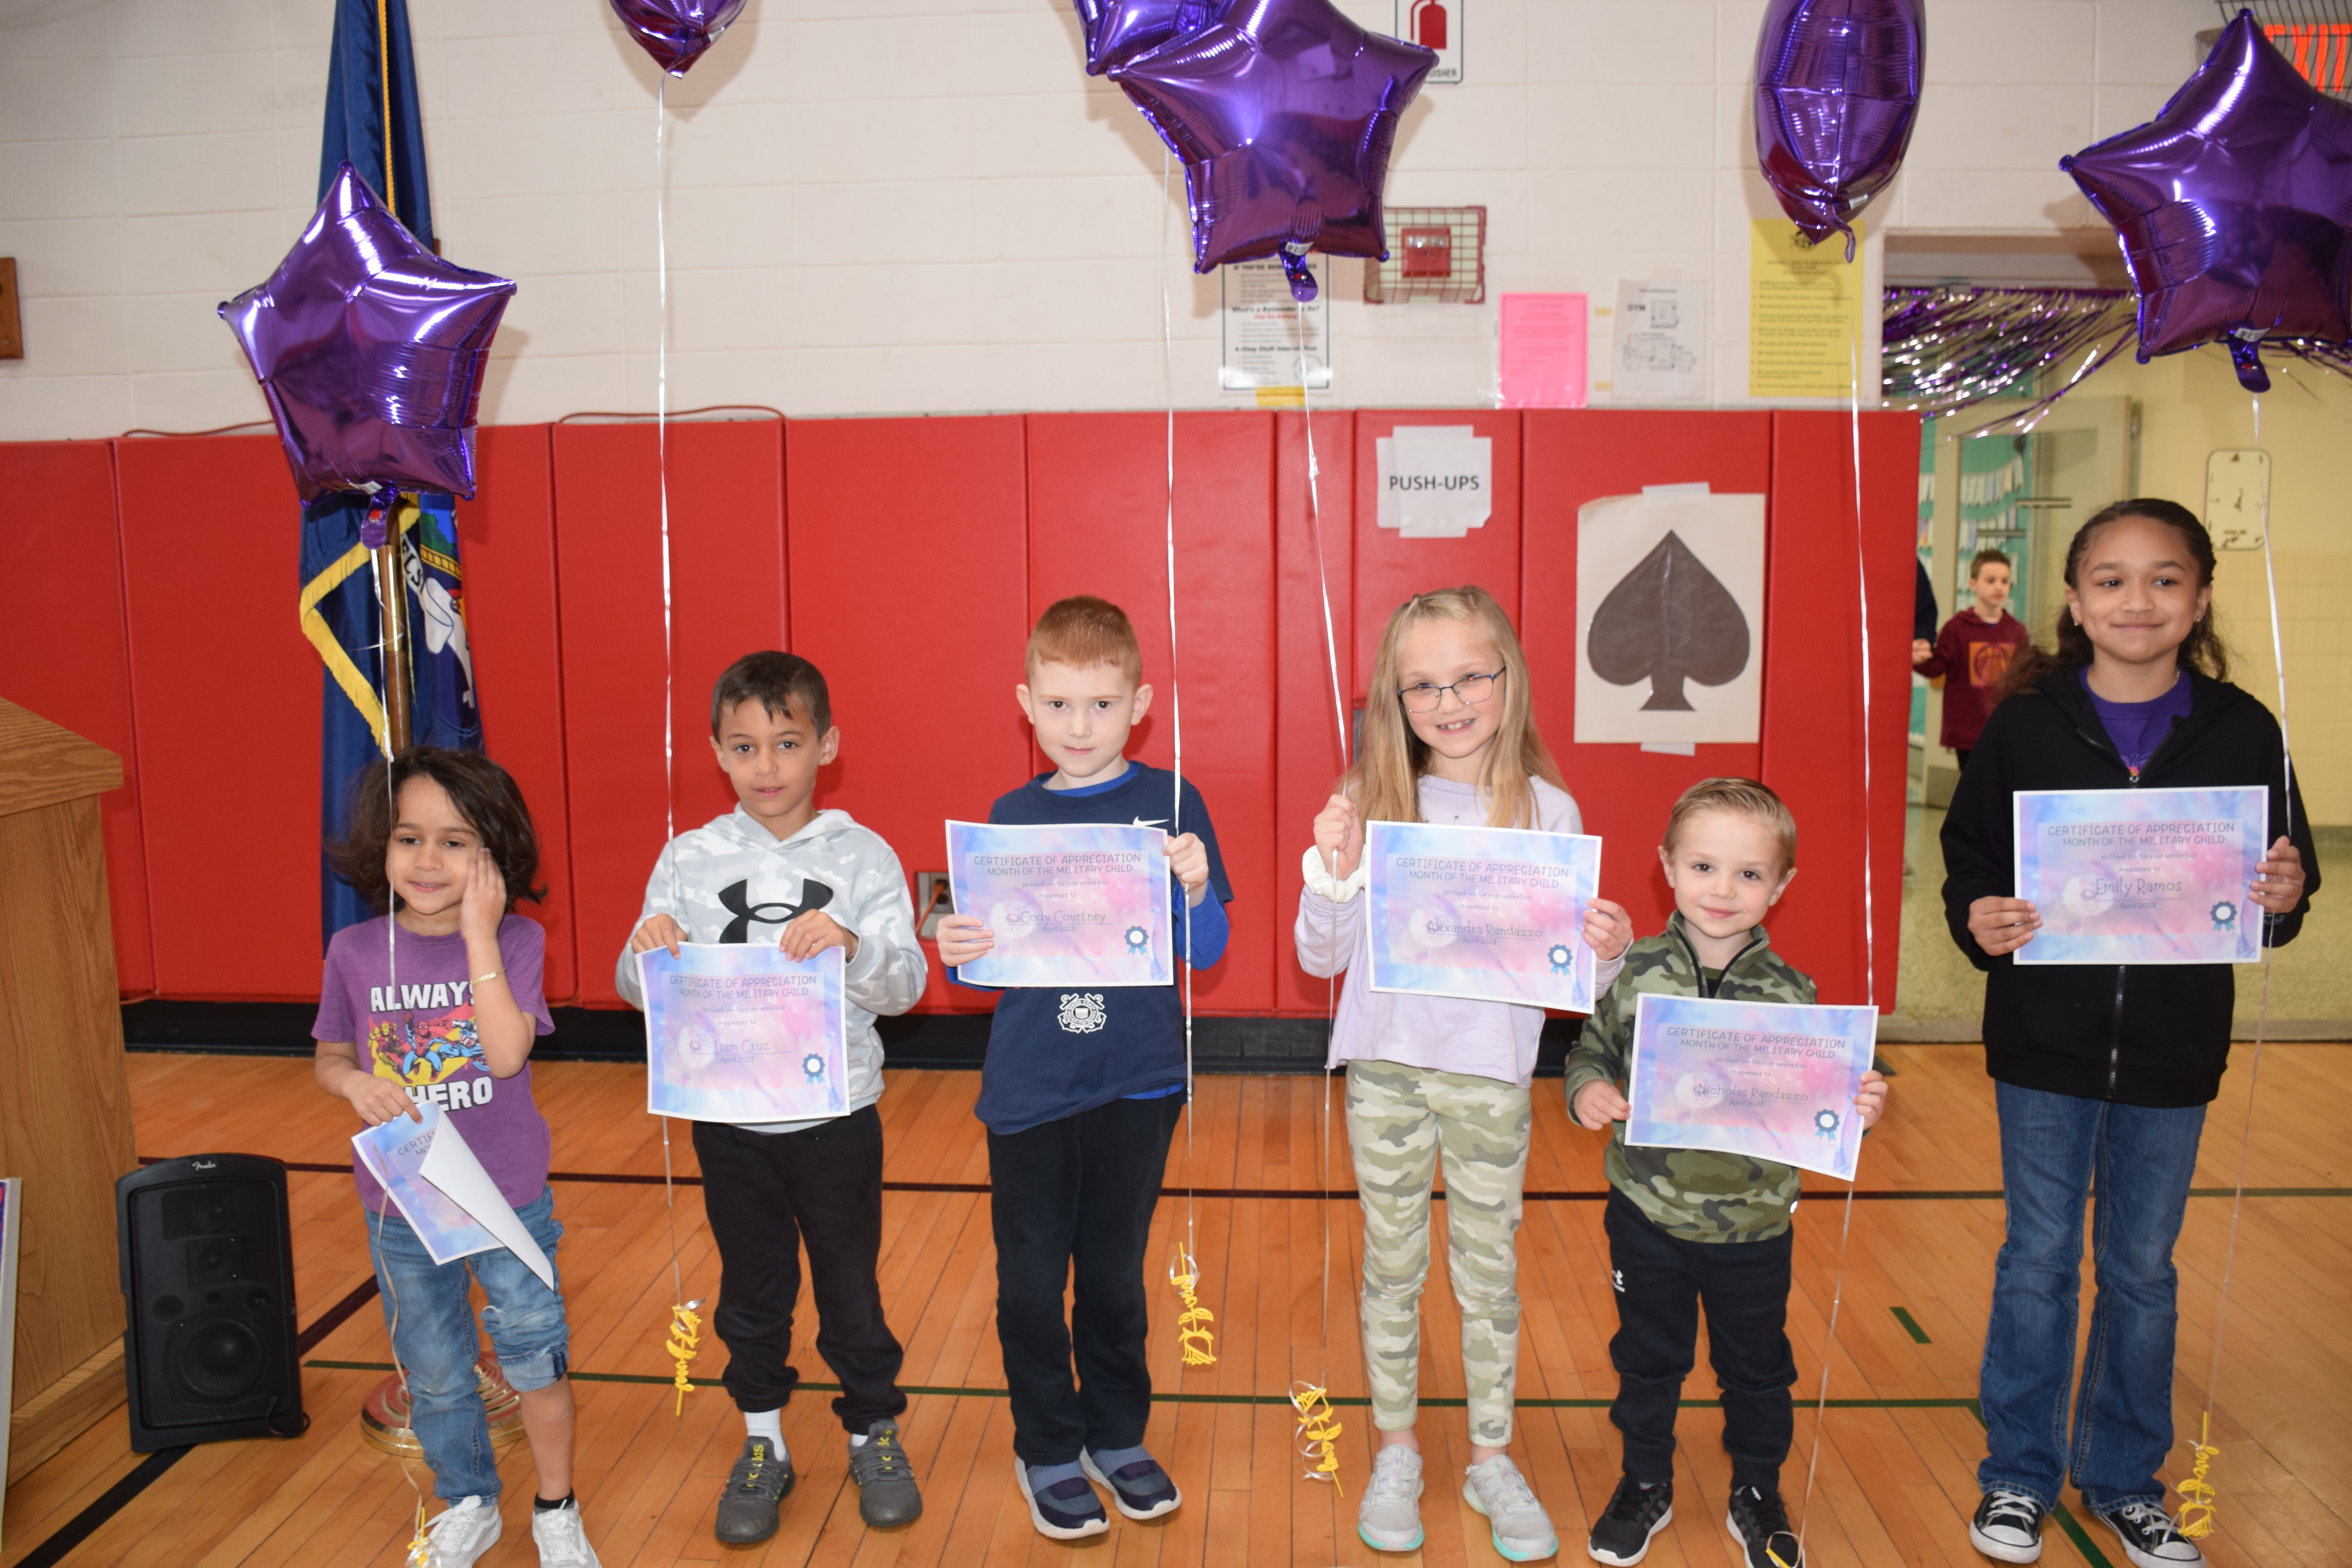 In recognition of April as Month of the Military Child, Edward J. Bosti Elementary School in the Connetquot Central School District held a special “Purple Up” assembly on April 26 to honor students whose parents are currently active military. The students